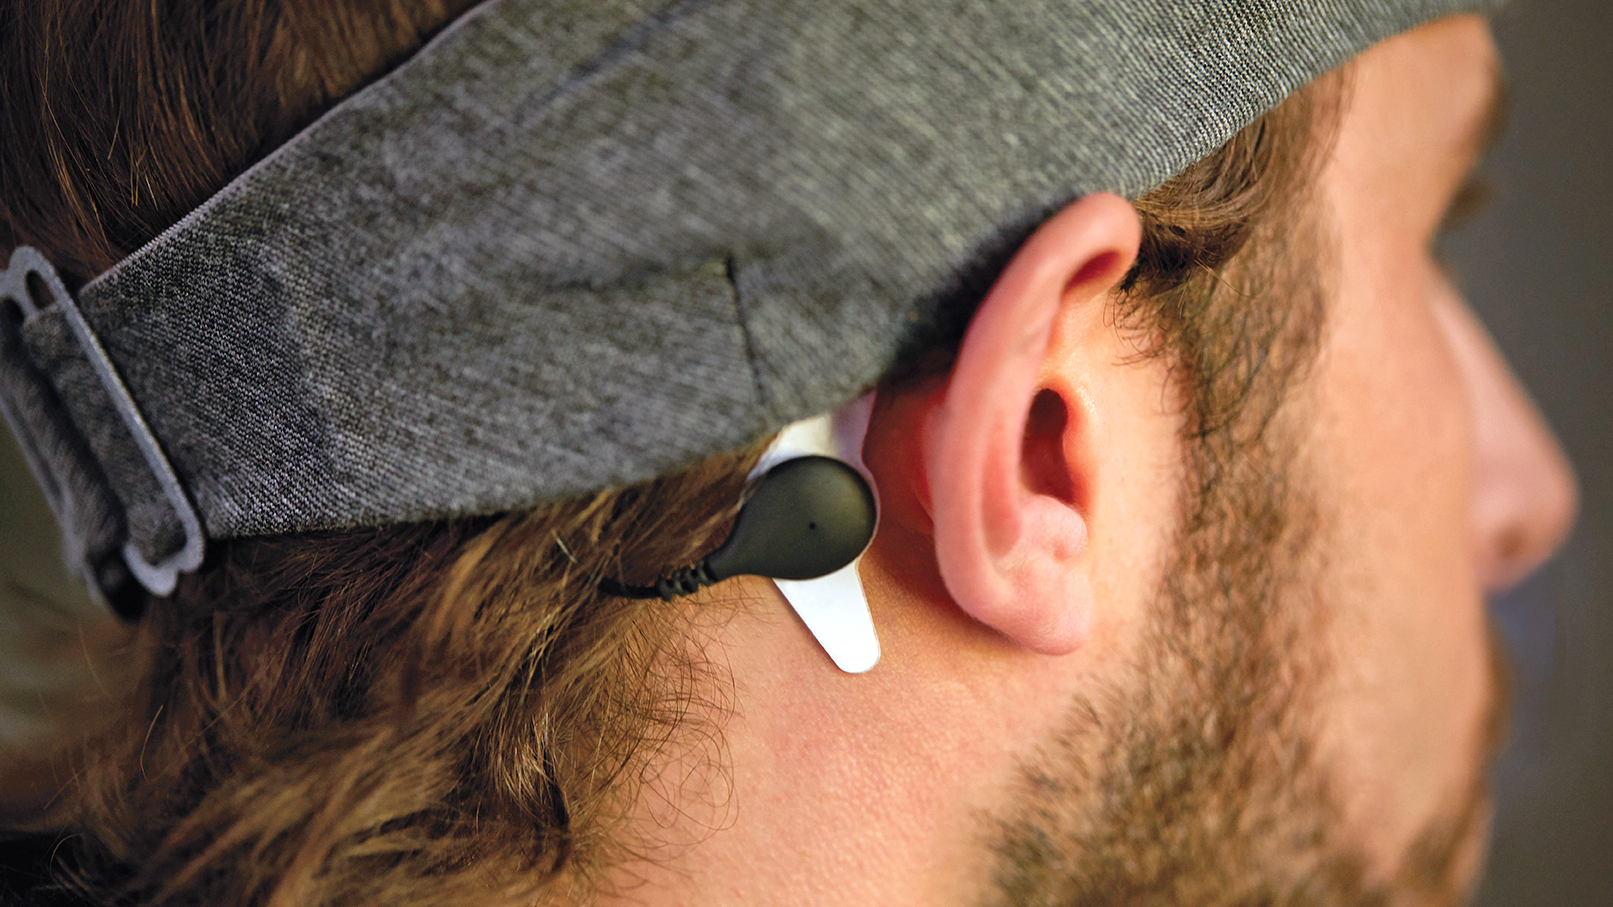 Philips’ New Headband Promises Better Sleep By Whispering In Your Ear All Night Long